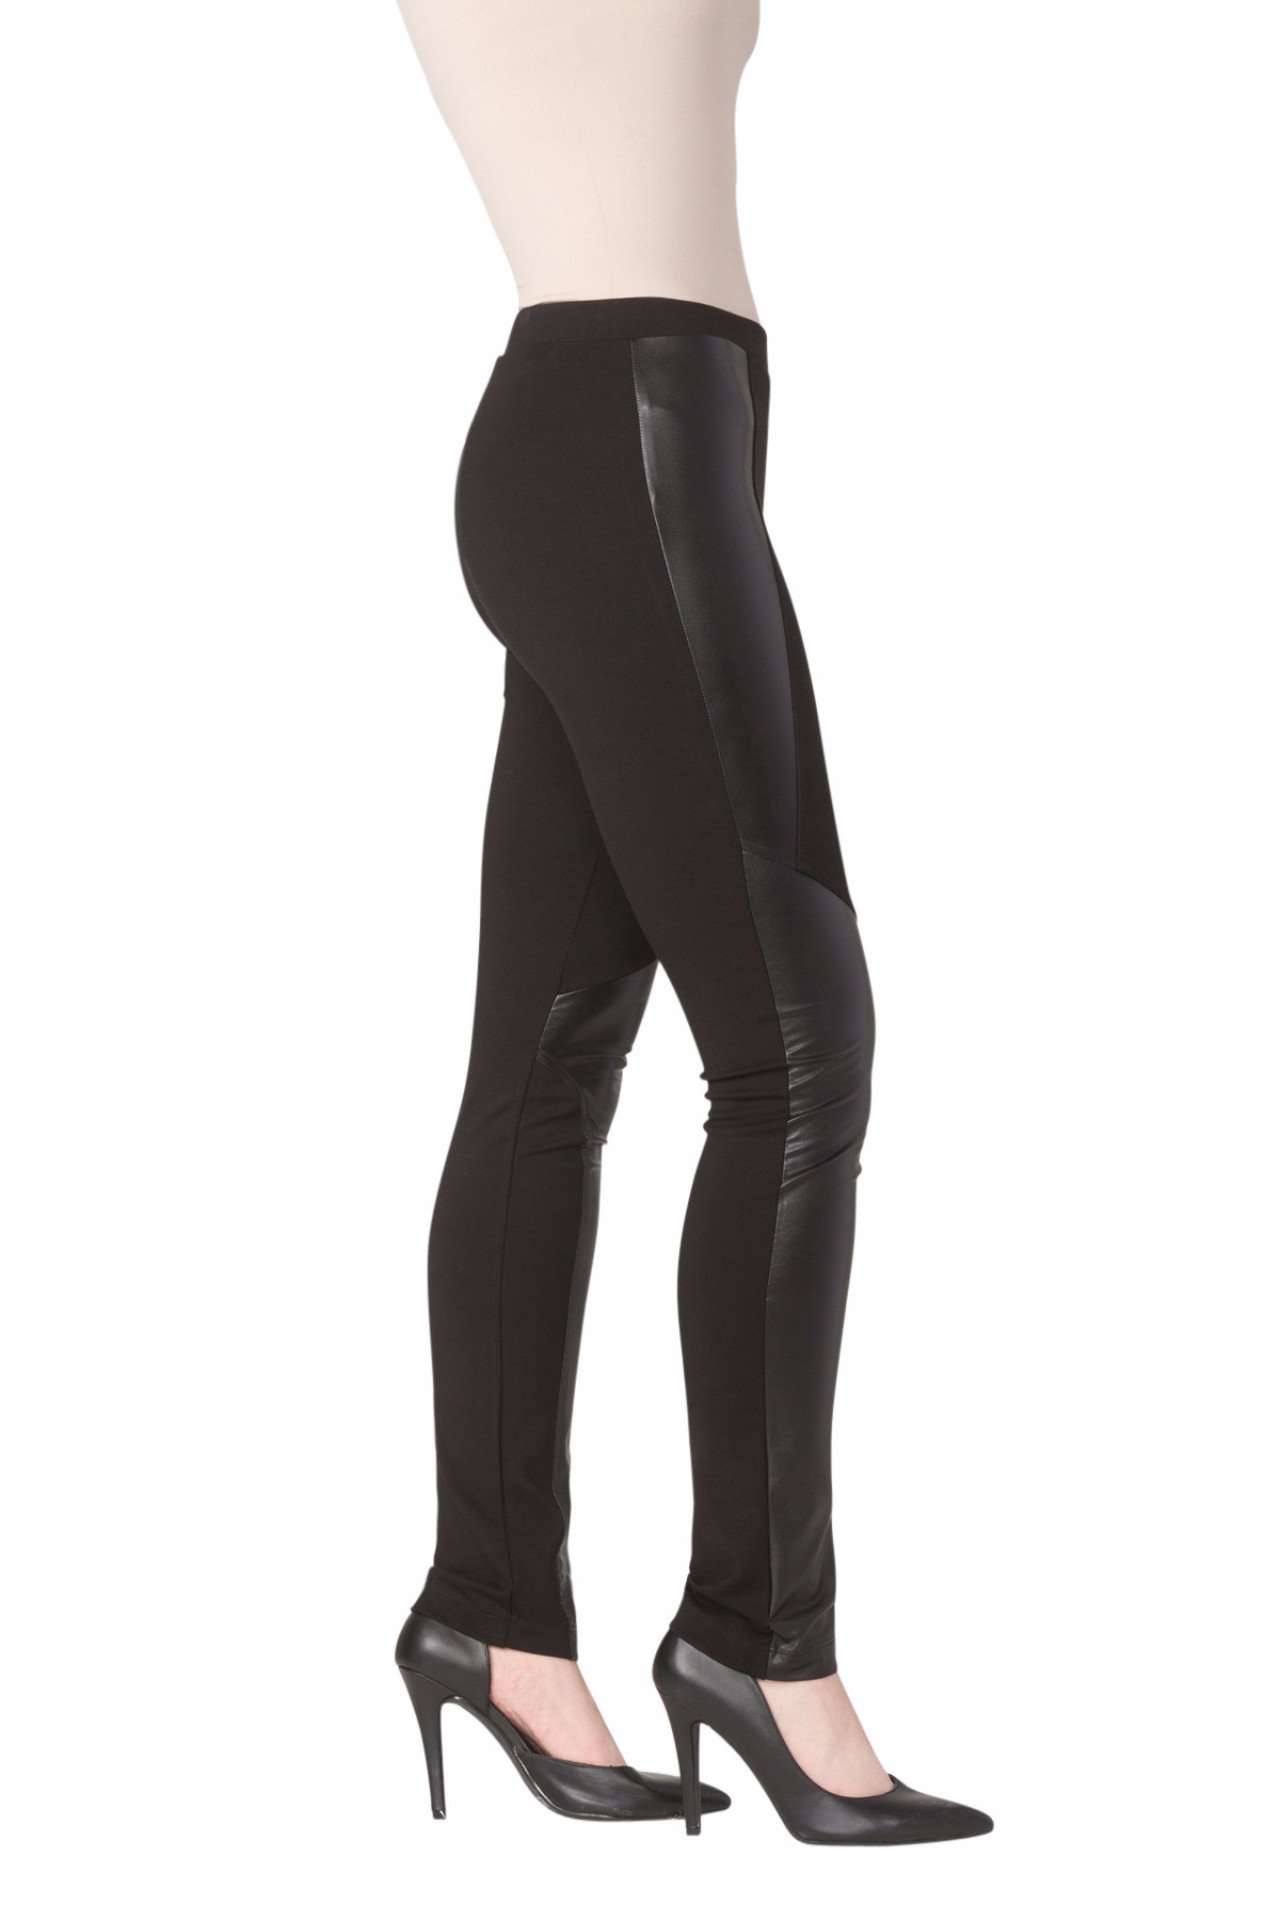 Women's Pants Black Leather Side Detail Quality Stretch Fabric Made in  Canada